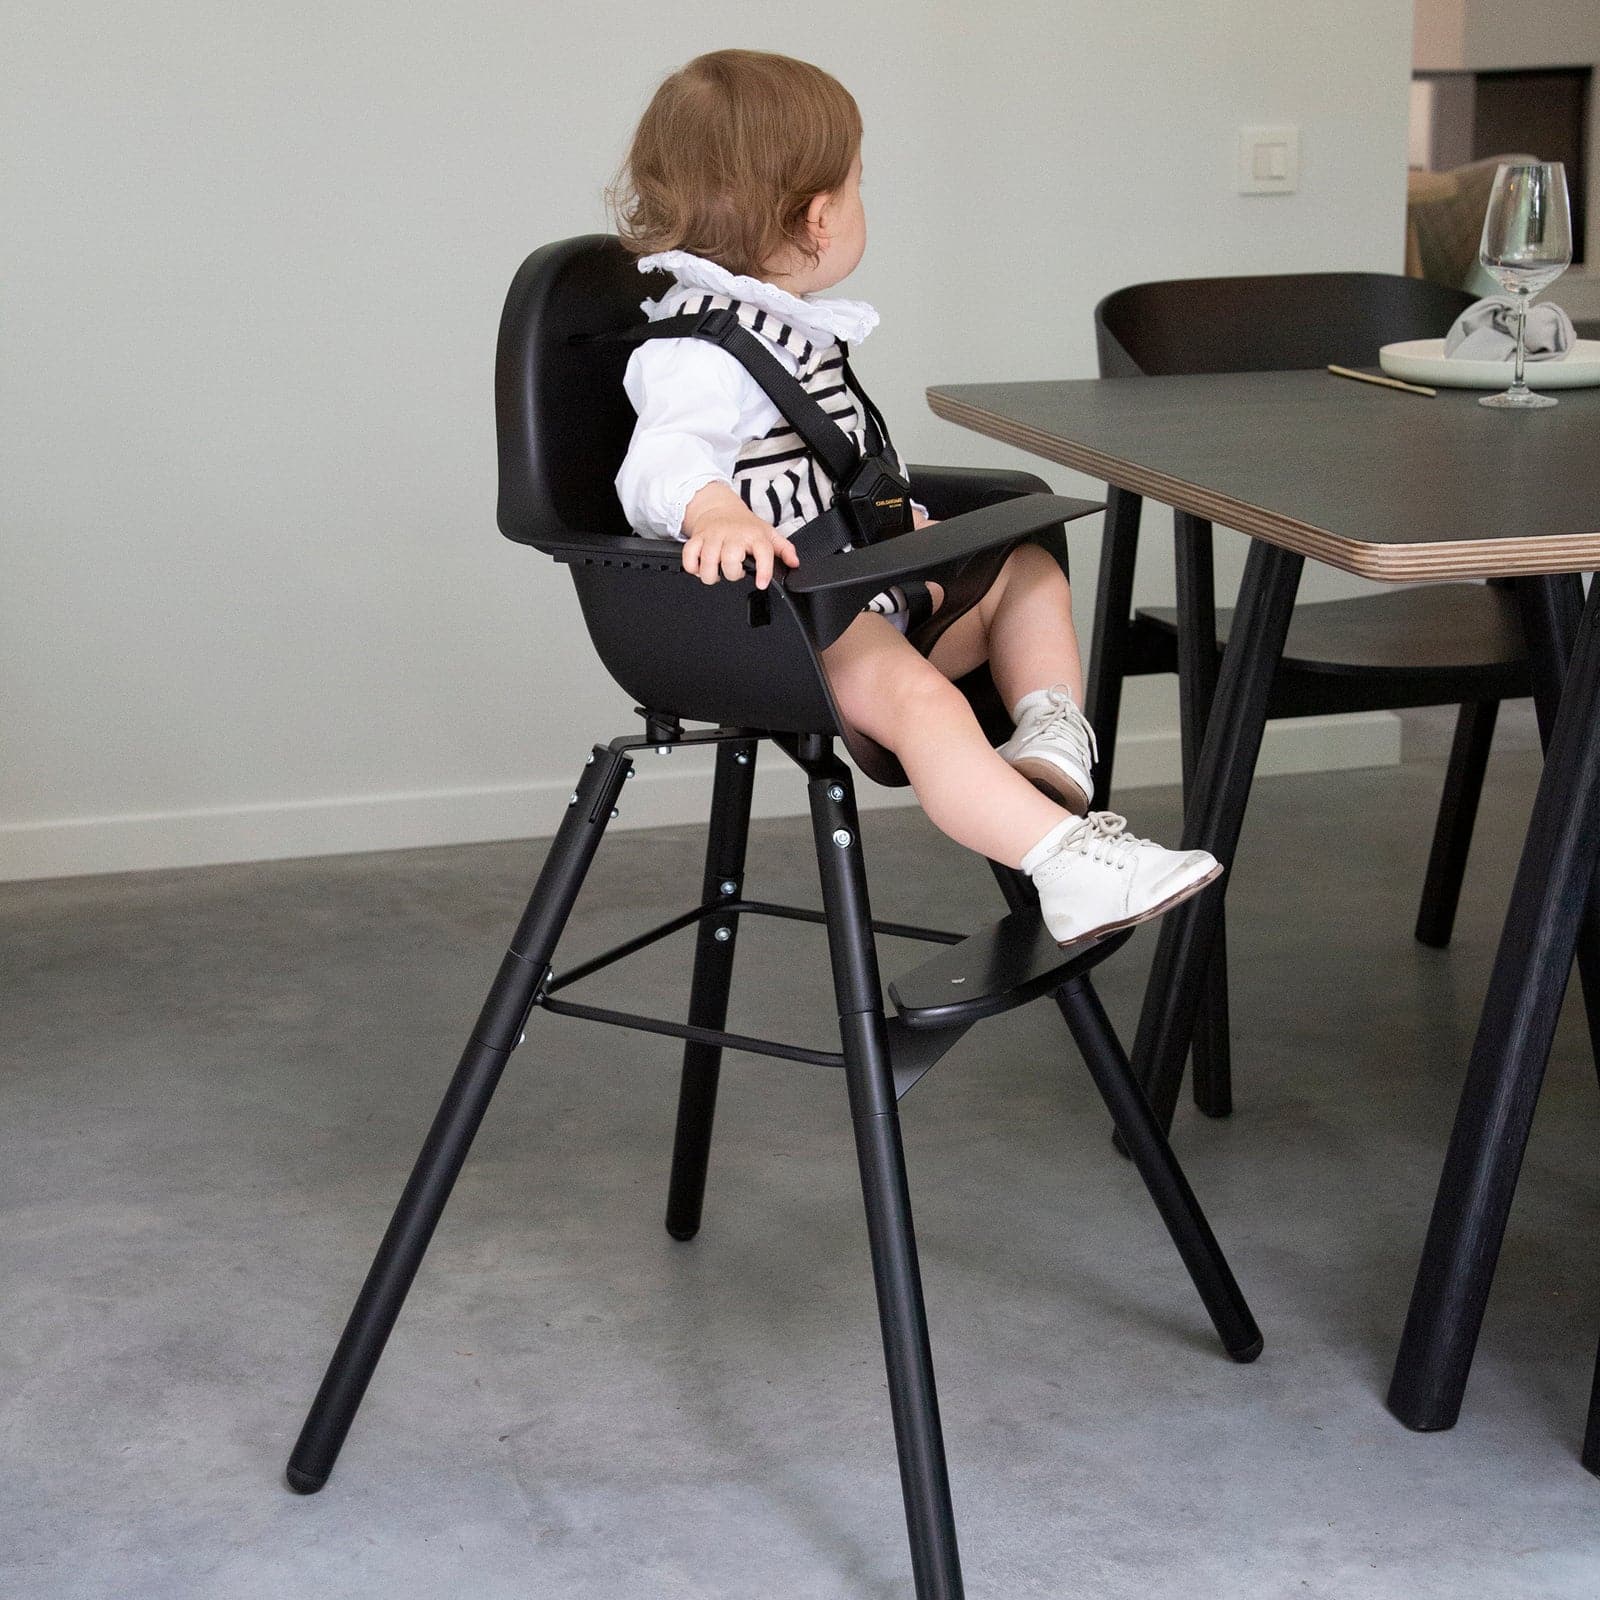 Childhome Evolu 2 High Chair - Black - For Your Little One